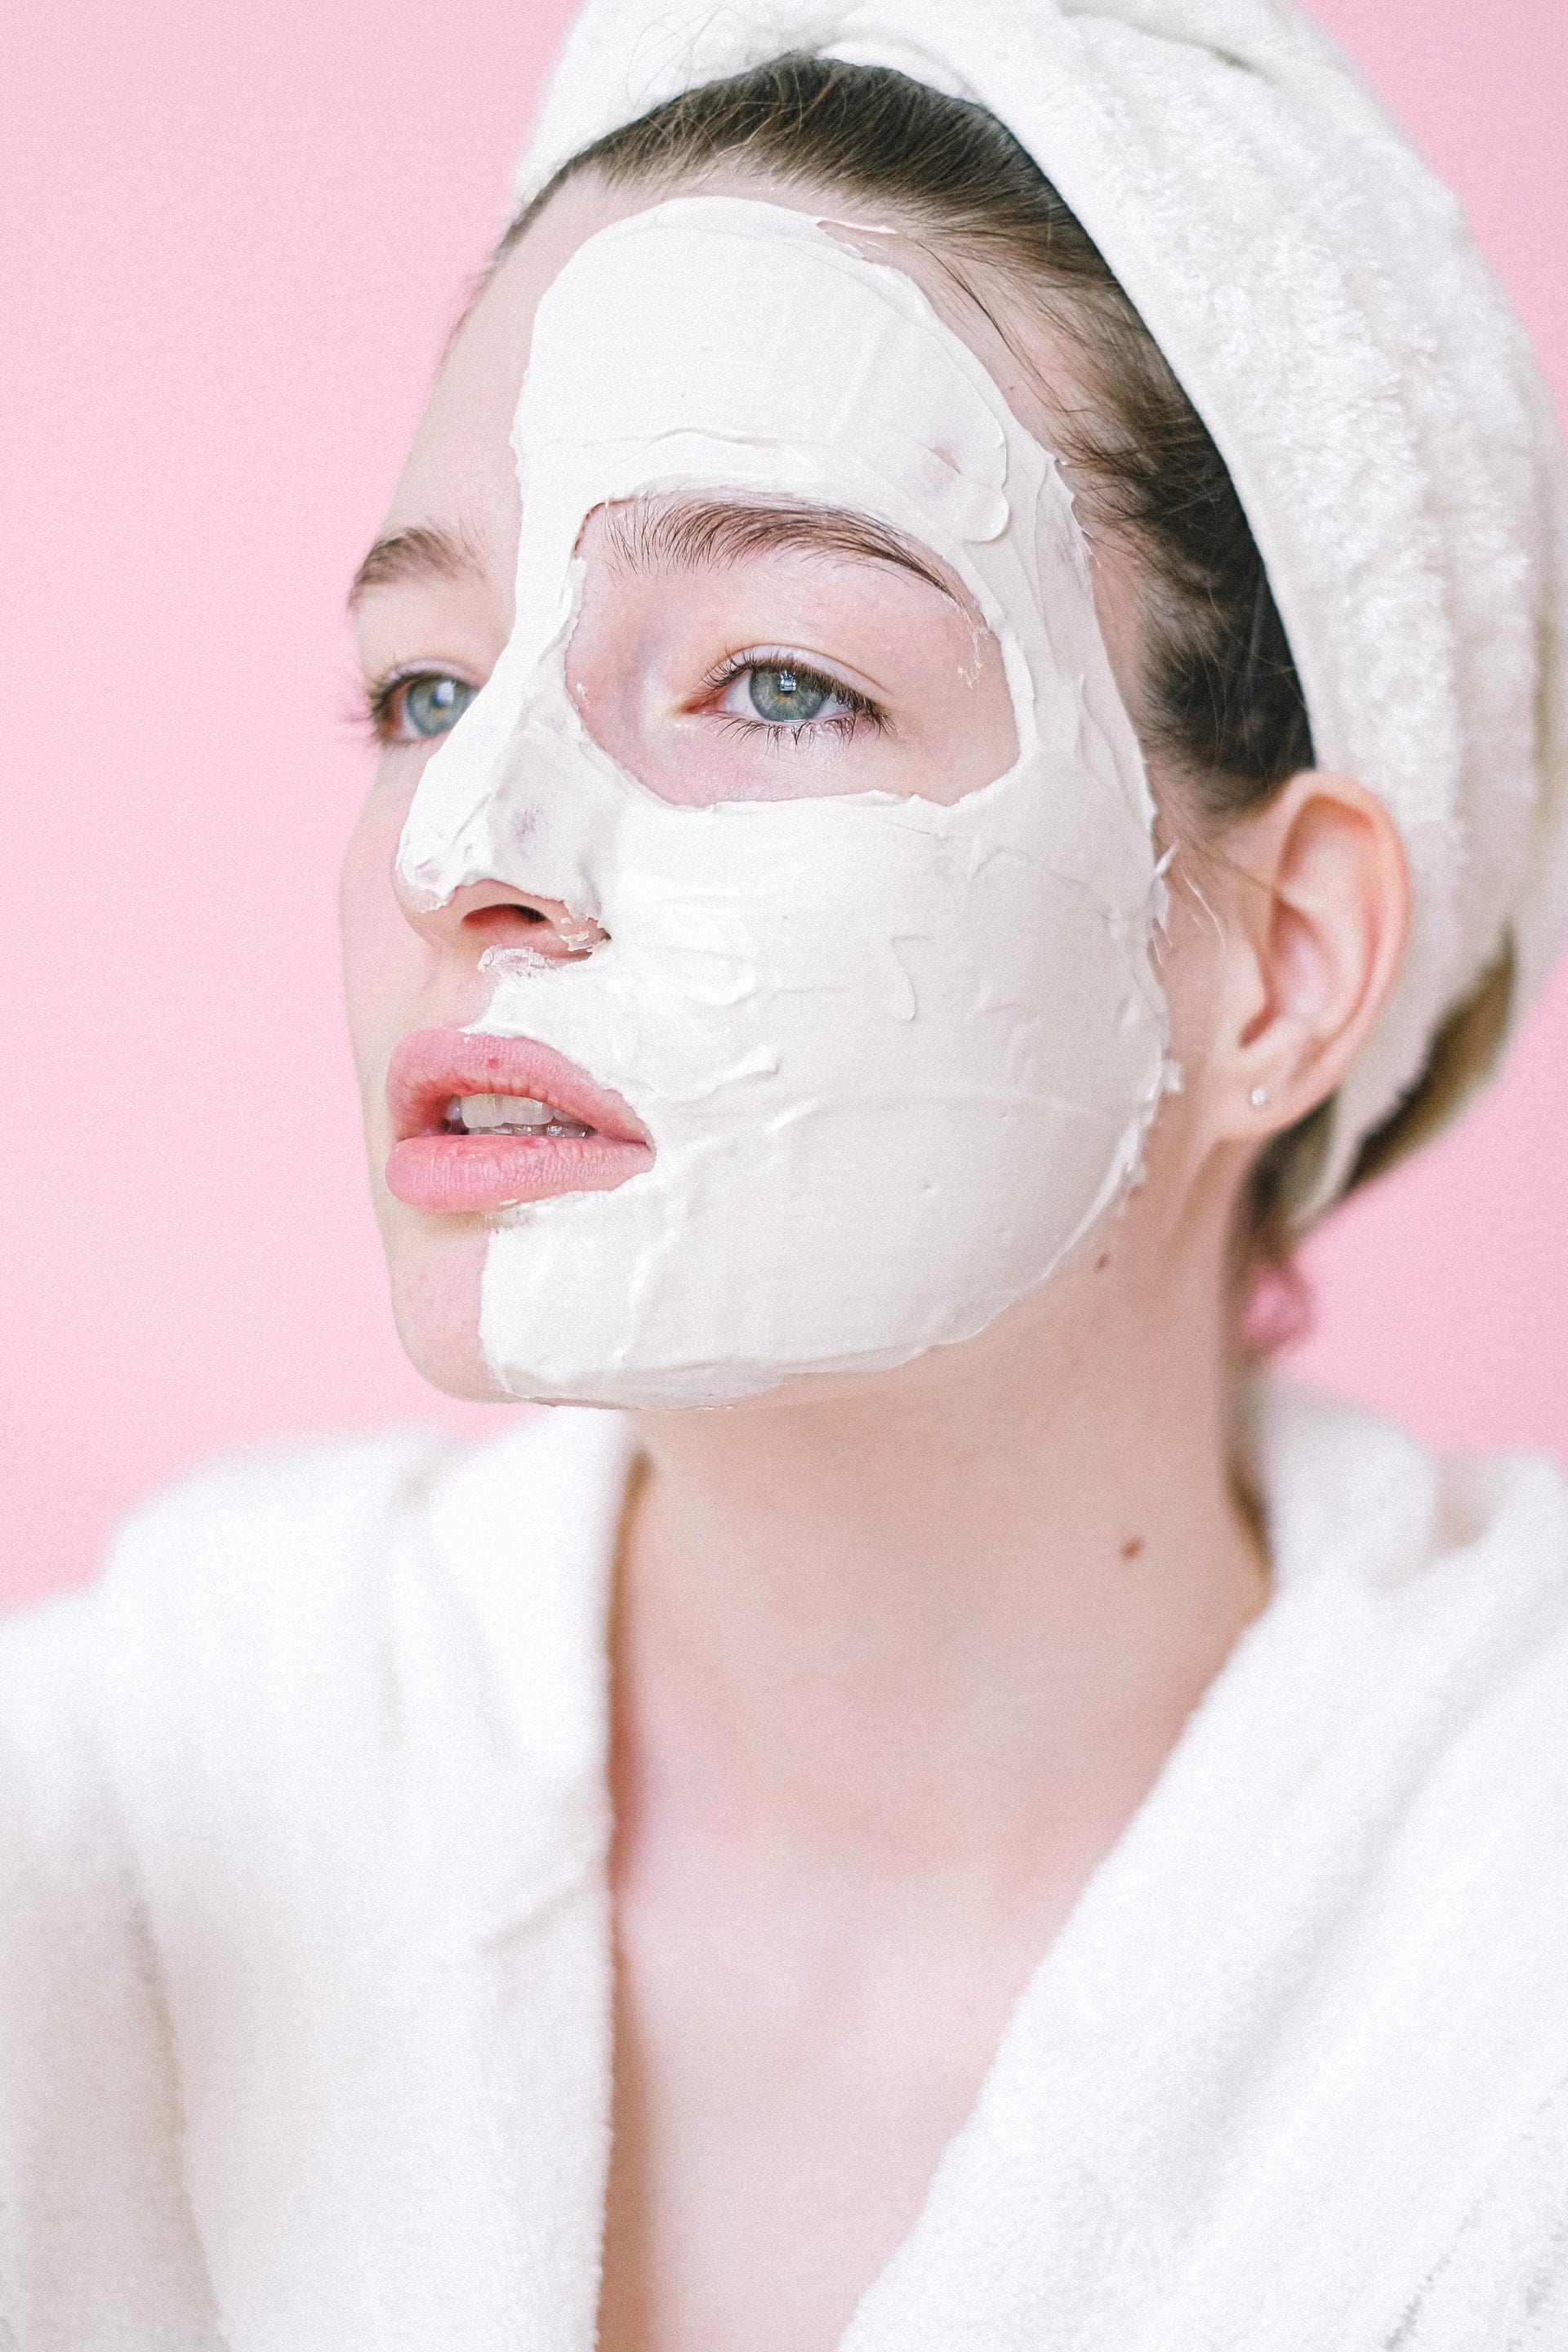 4 Skin Care Trends Everyone Is Talking About in 2022